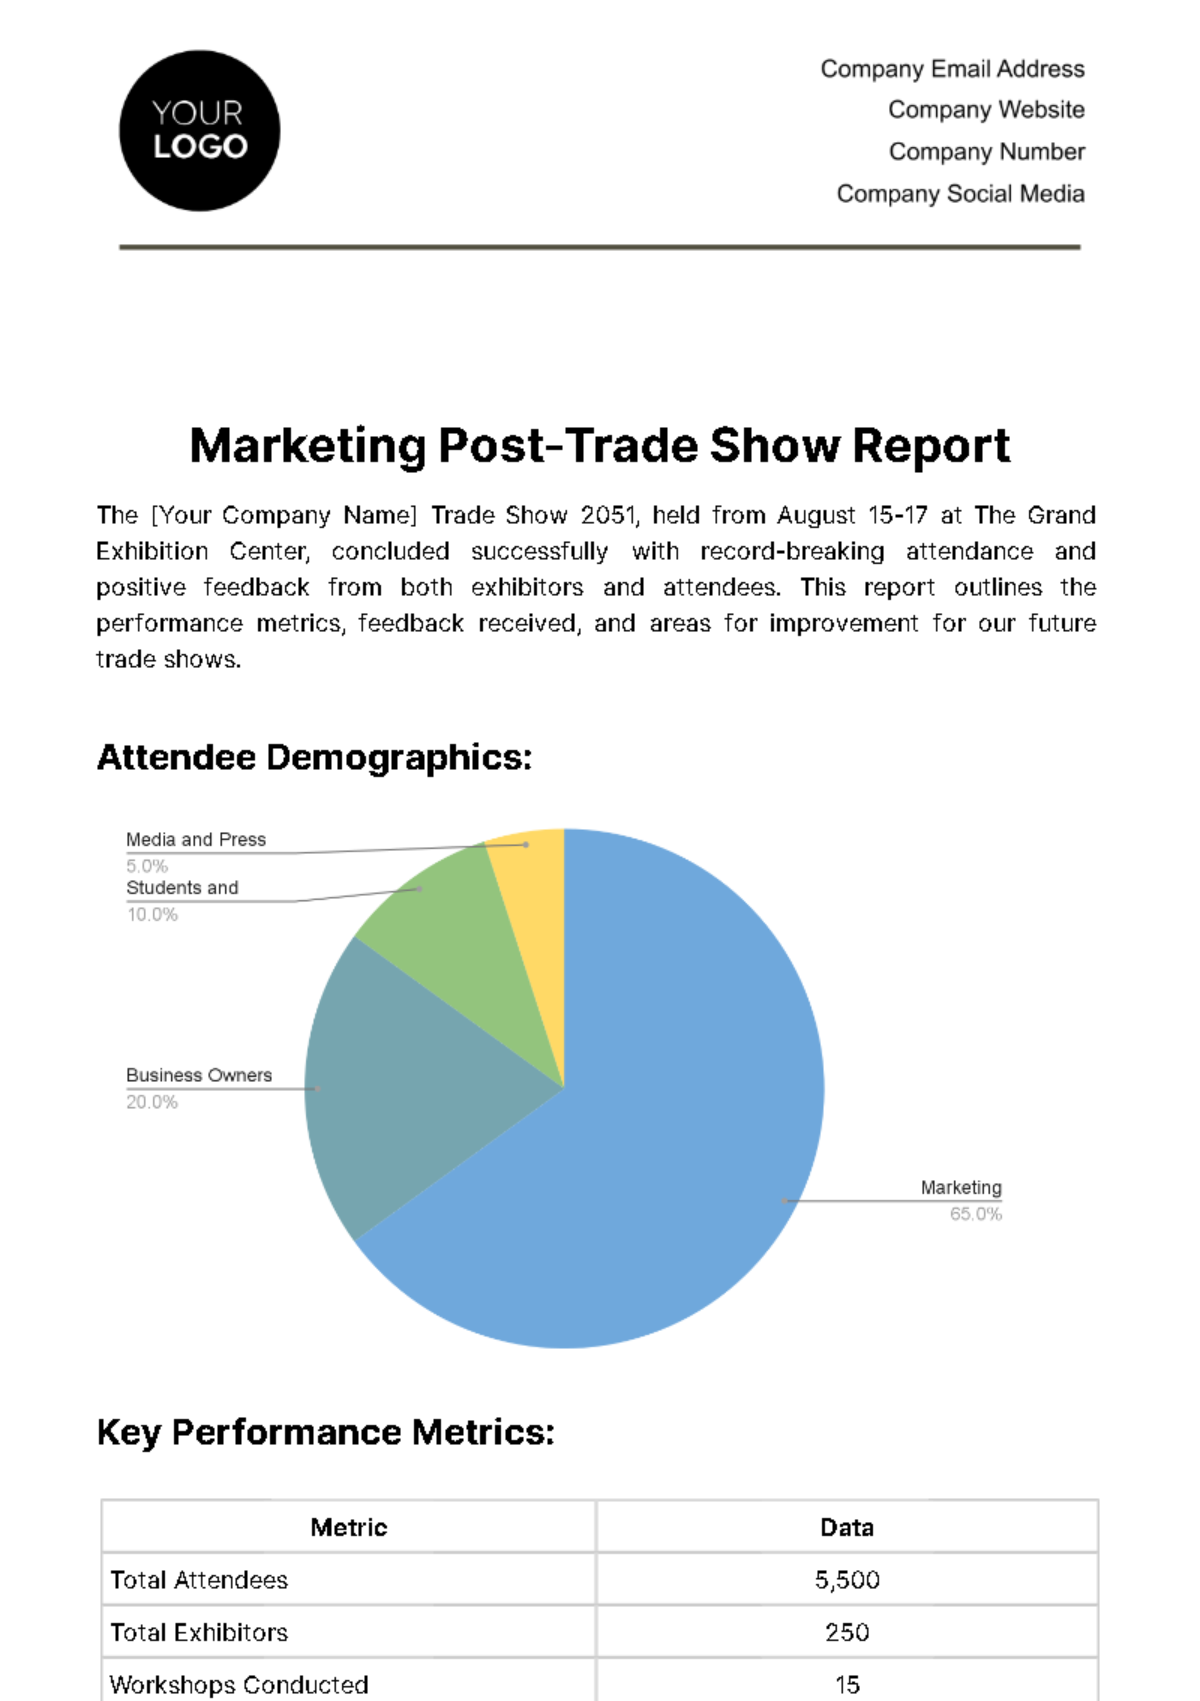 Free Marketing Post-Trade Show Report Template